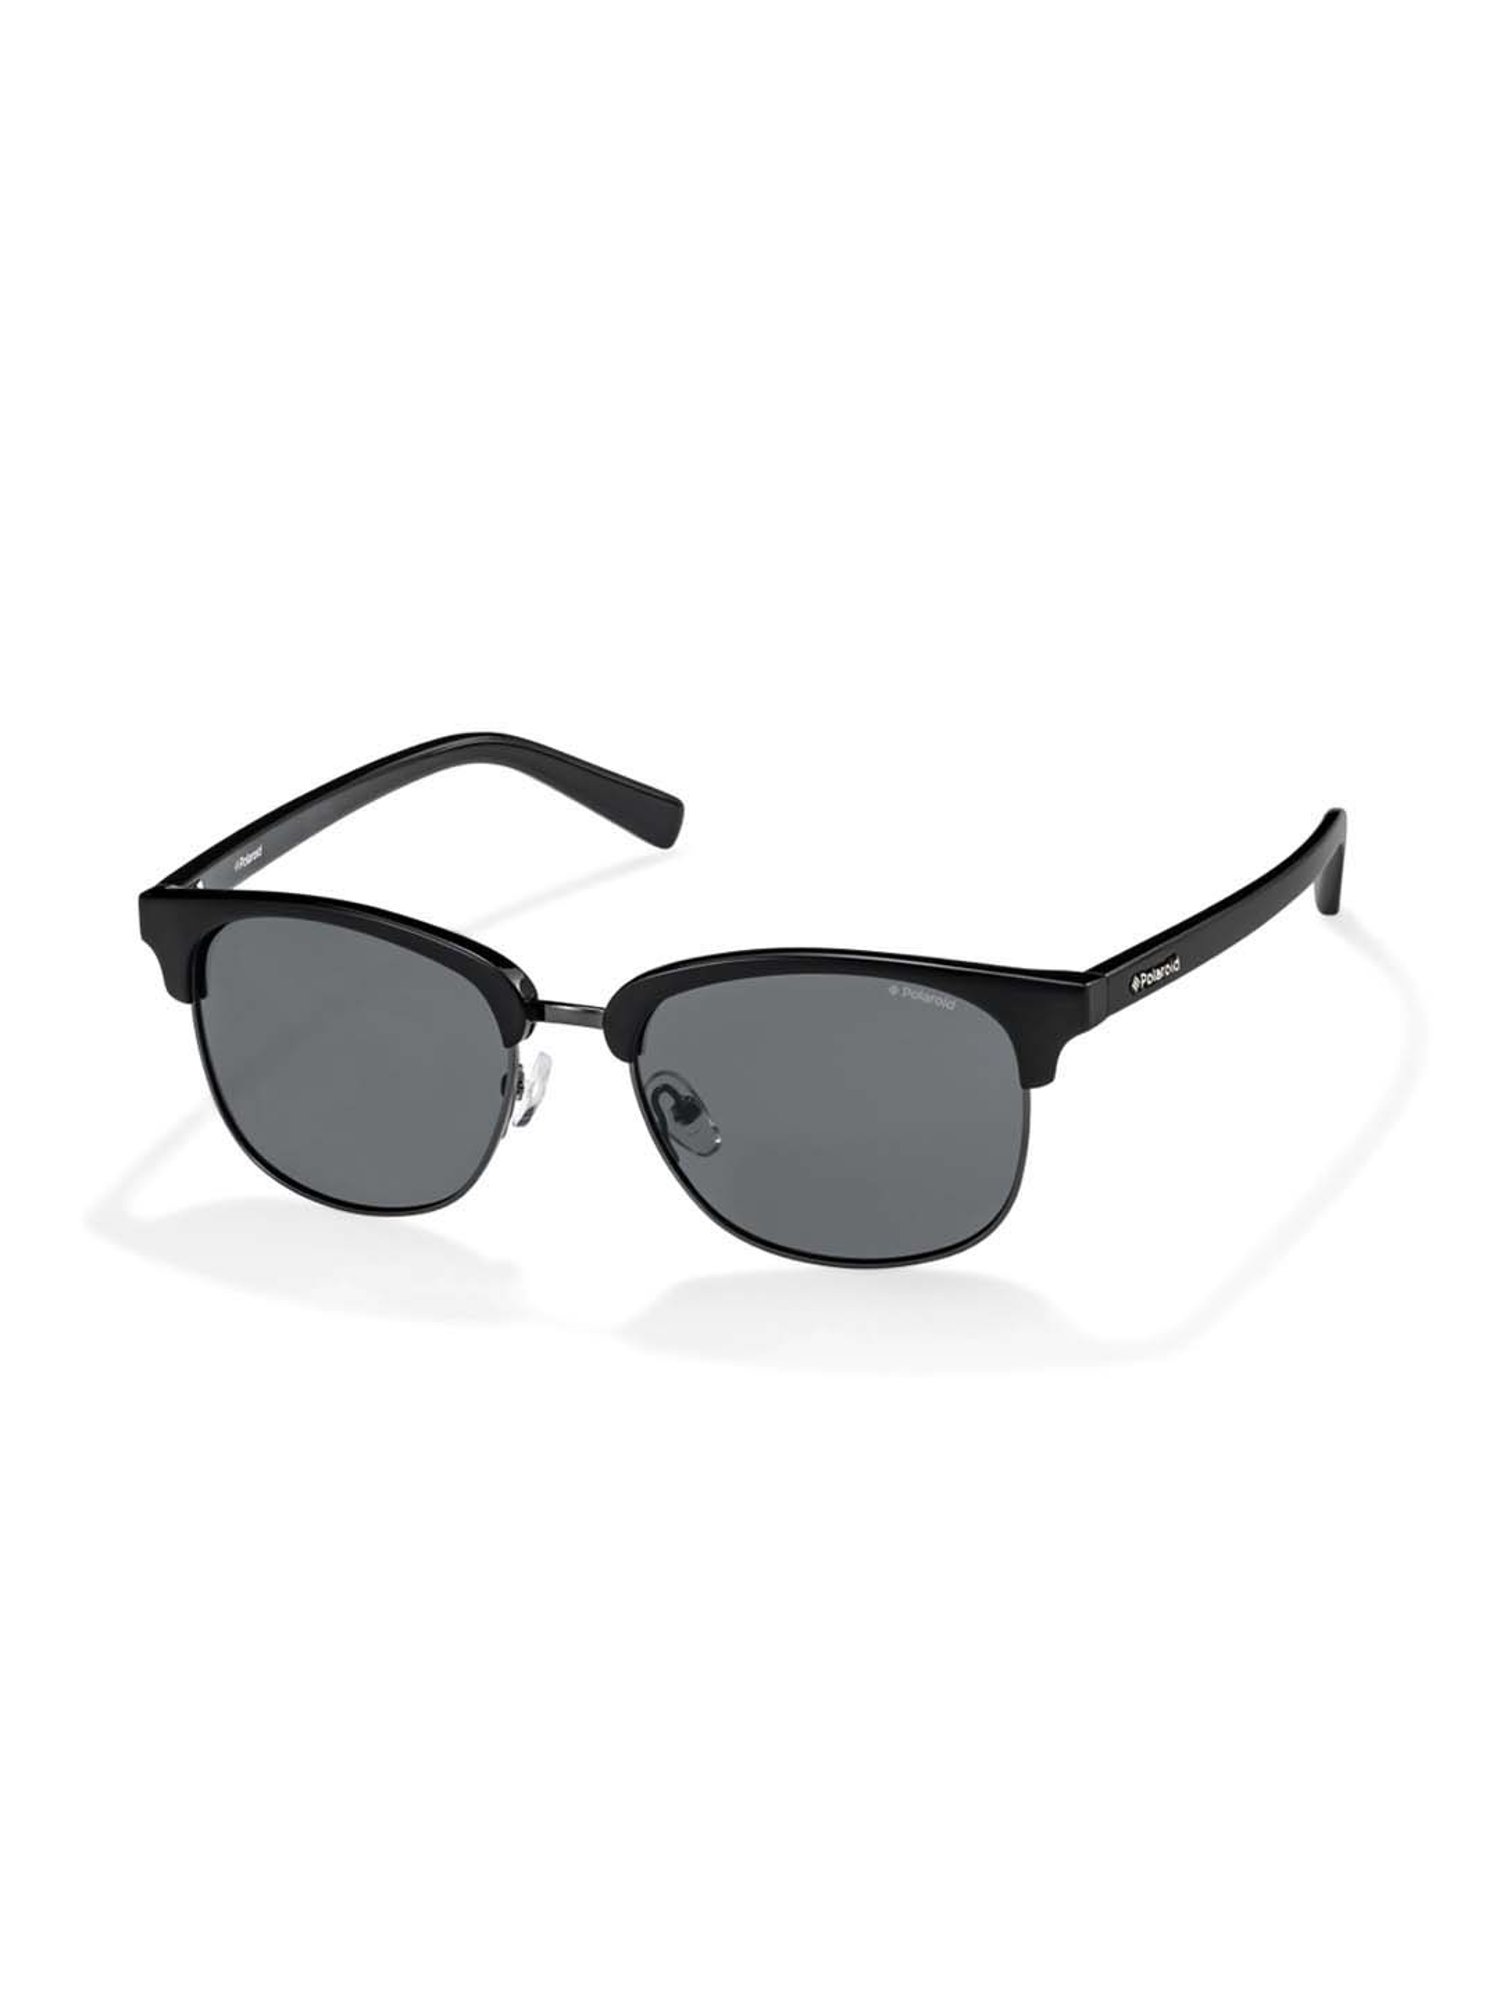 Ray-Ban Clubmaster Metal RB3716 186/R5 51 Sunglasses | Shade Station